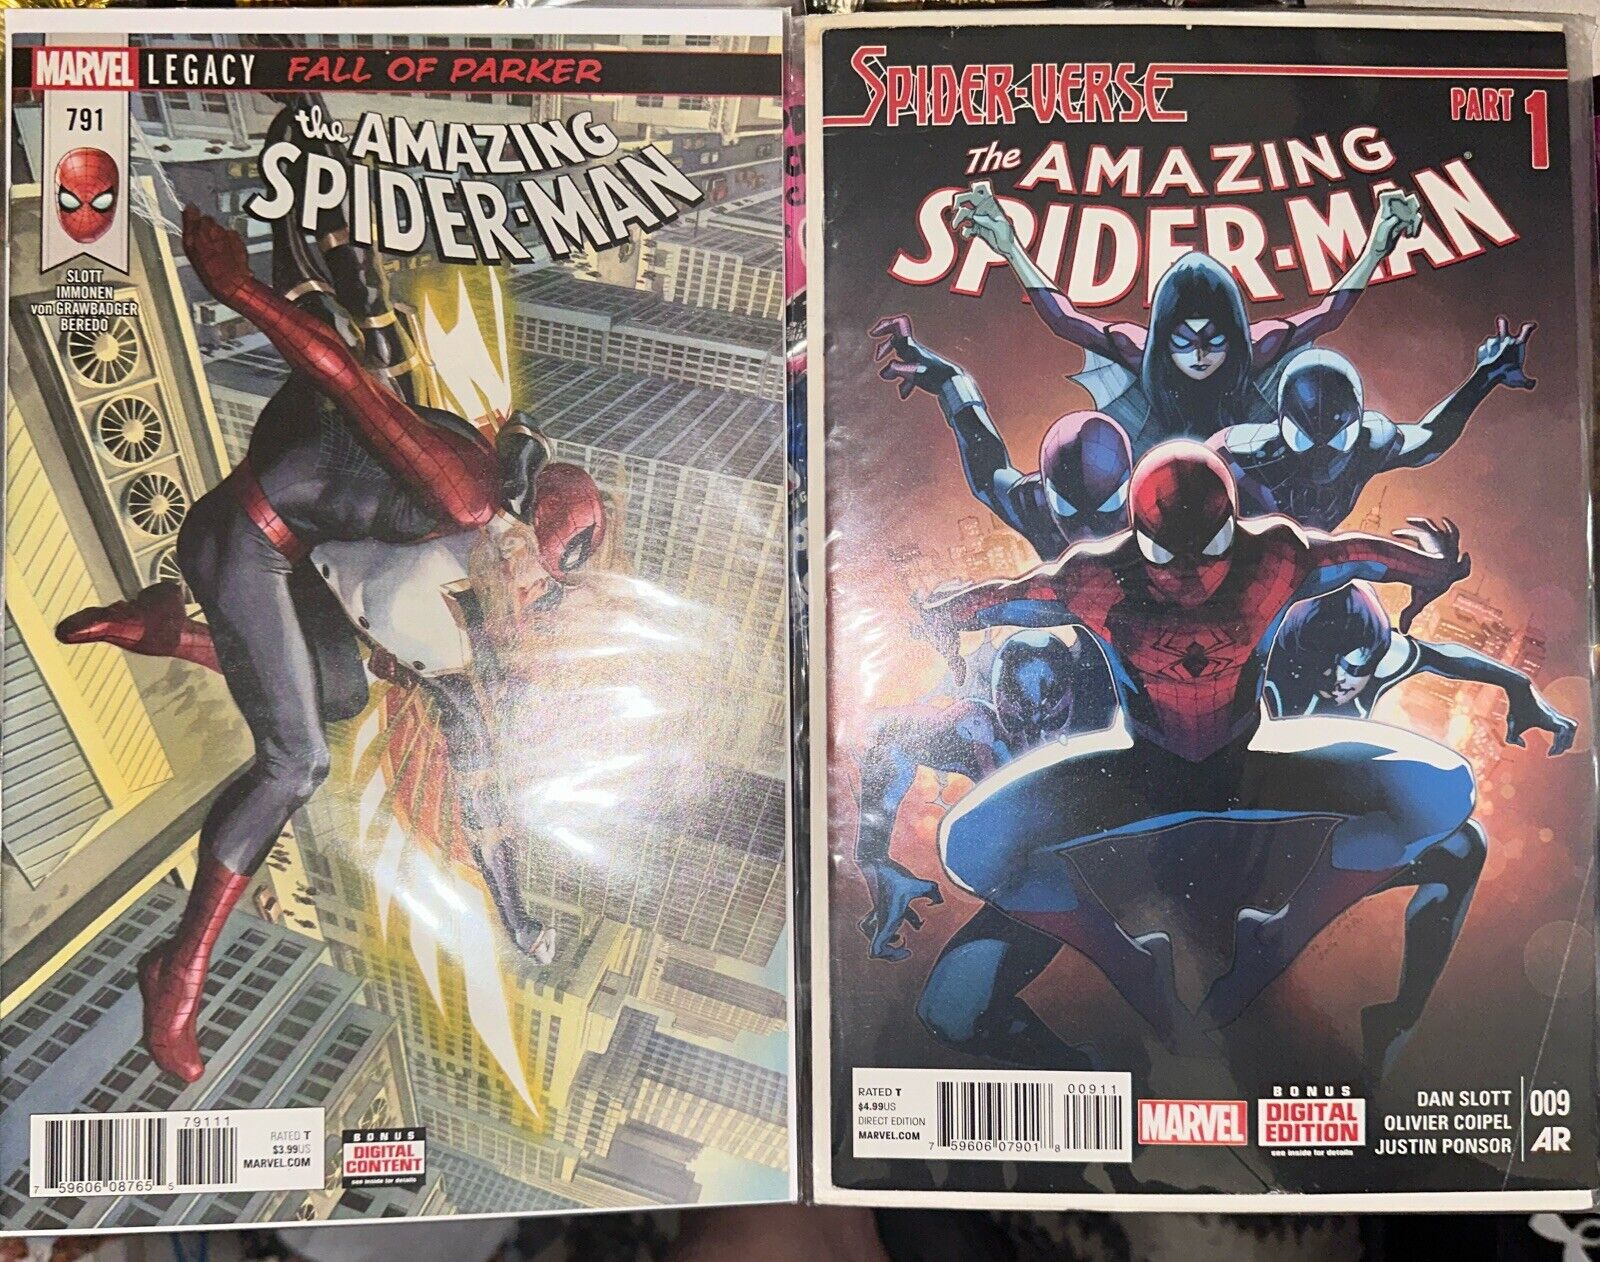 The Amazing Spider-man Spider-verse Part 1 009 & Issue 791 Fall Of Parker